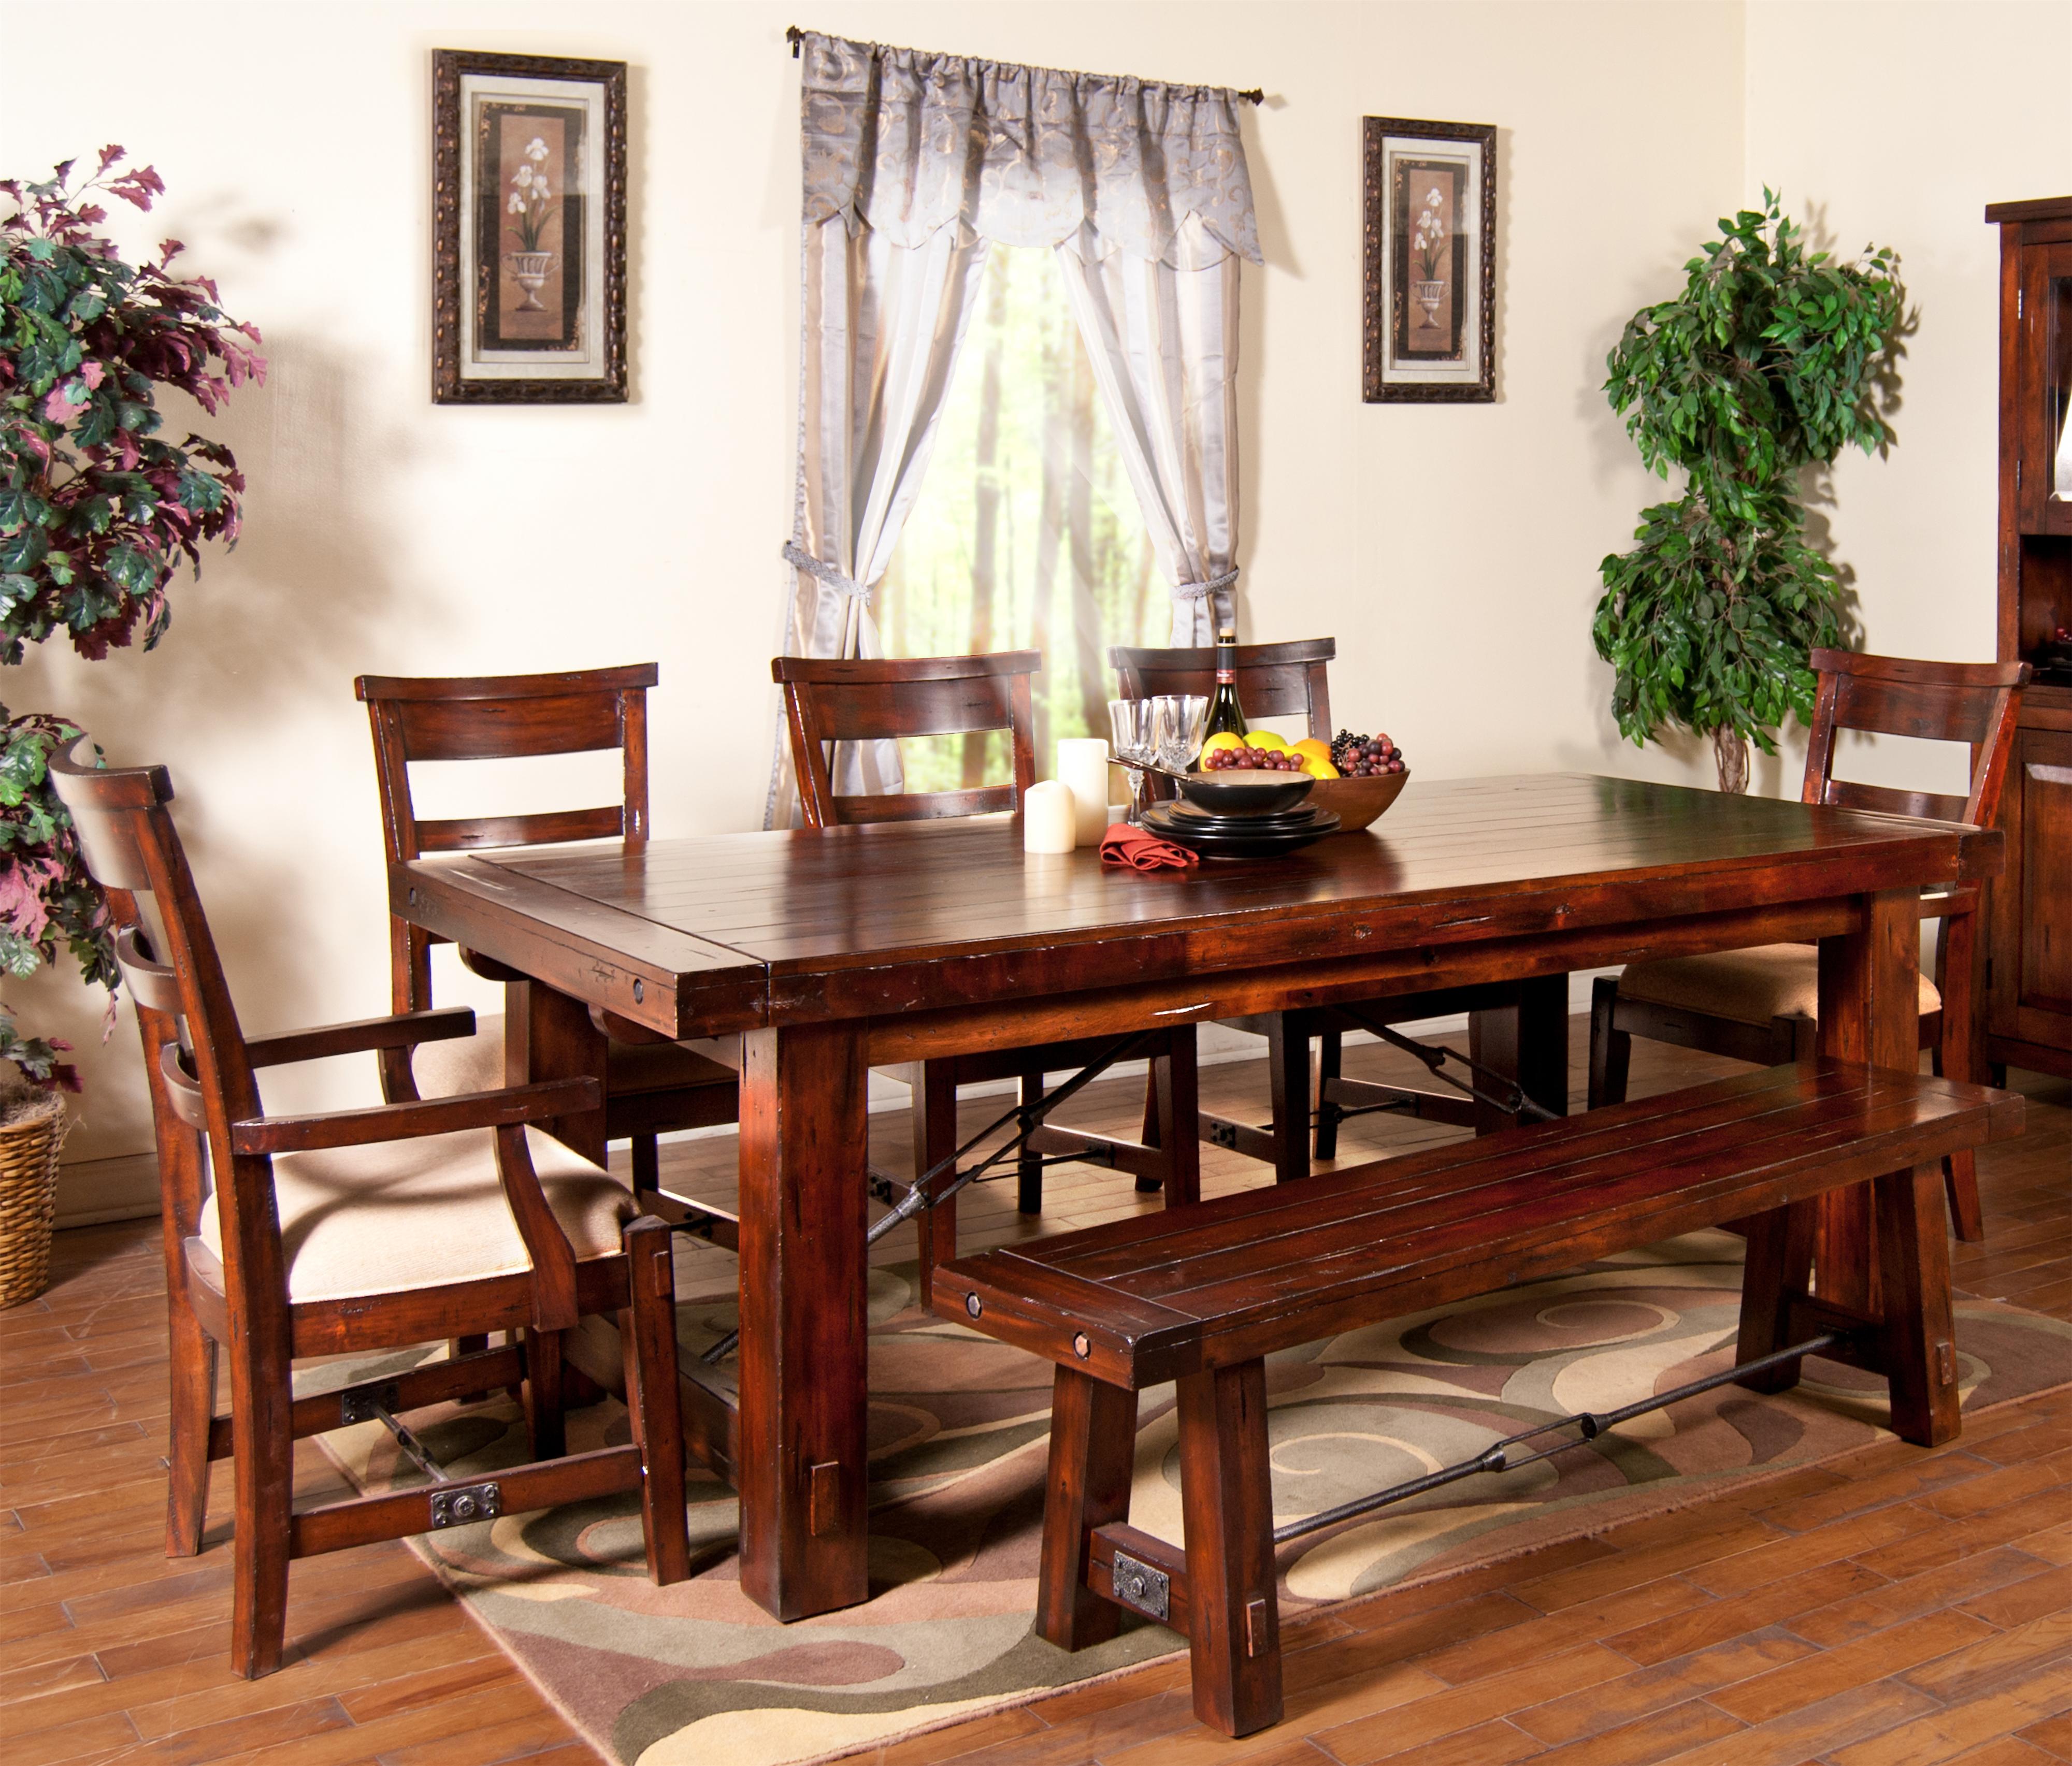 kitchen tables full size of chair:kitchen table sets rustic kitchen table sets ashley  furniture TZVJLXX